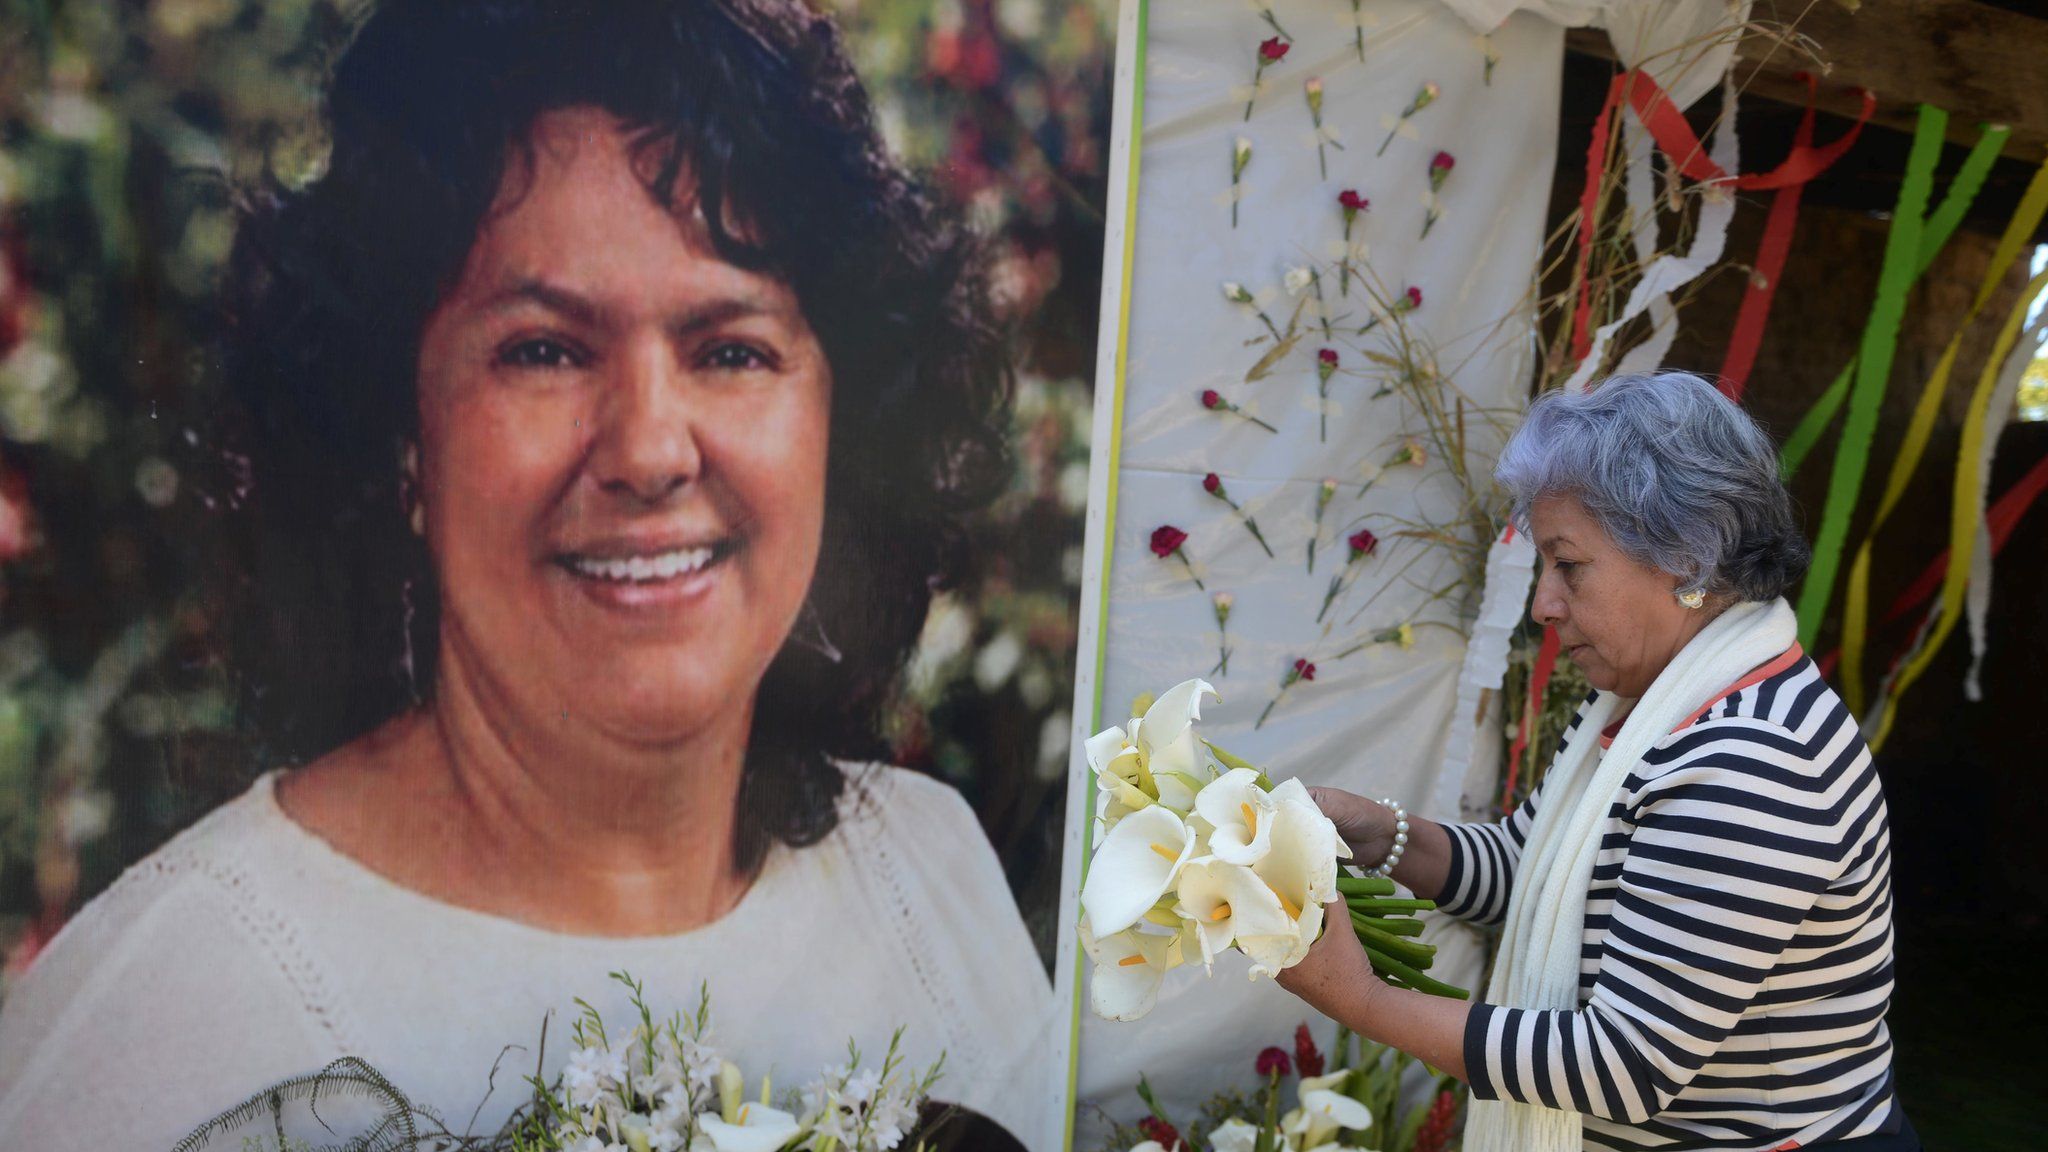 The president of the NGO Committee of Relatives of the Disappeared in Honduras (COFADEH), Bertha Oliva, lays a wreath on an alter in memory of murdered indigenous Honduran environmentalist Berta Caceres, in La Esperanza,